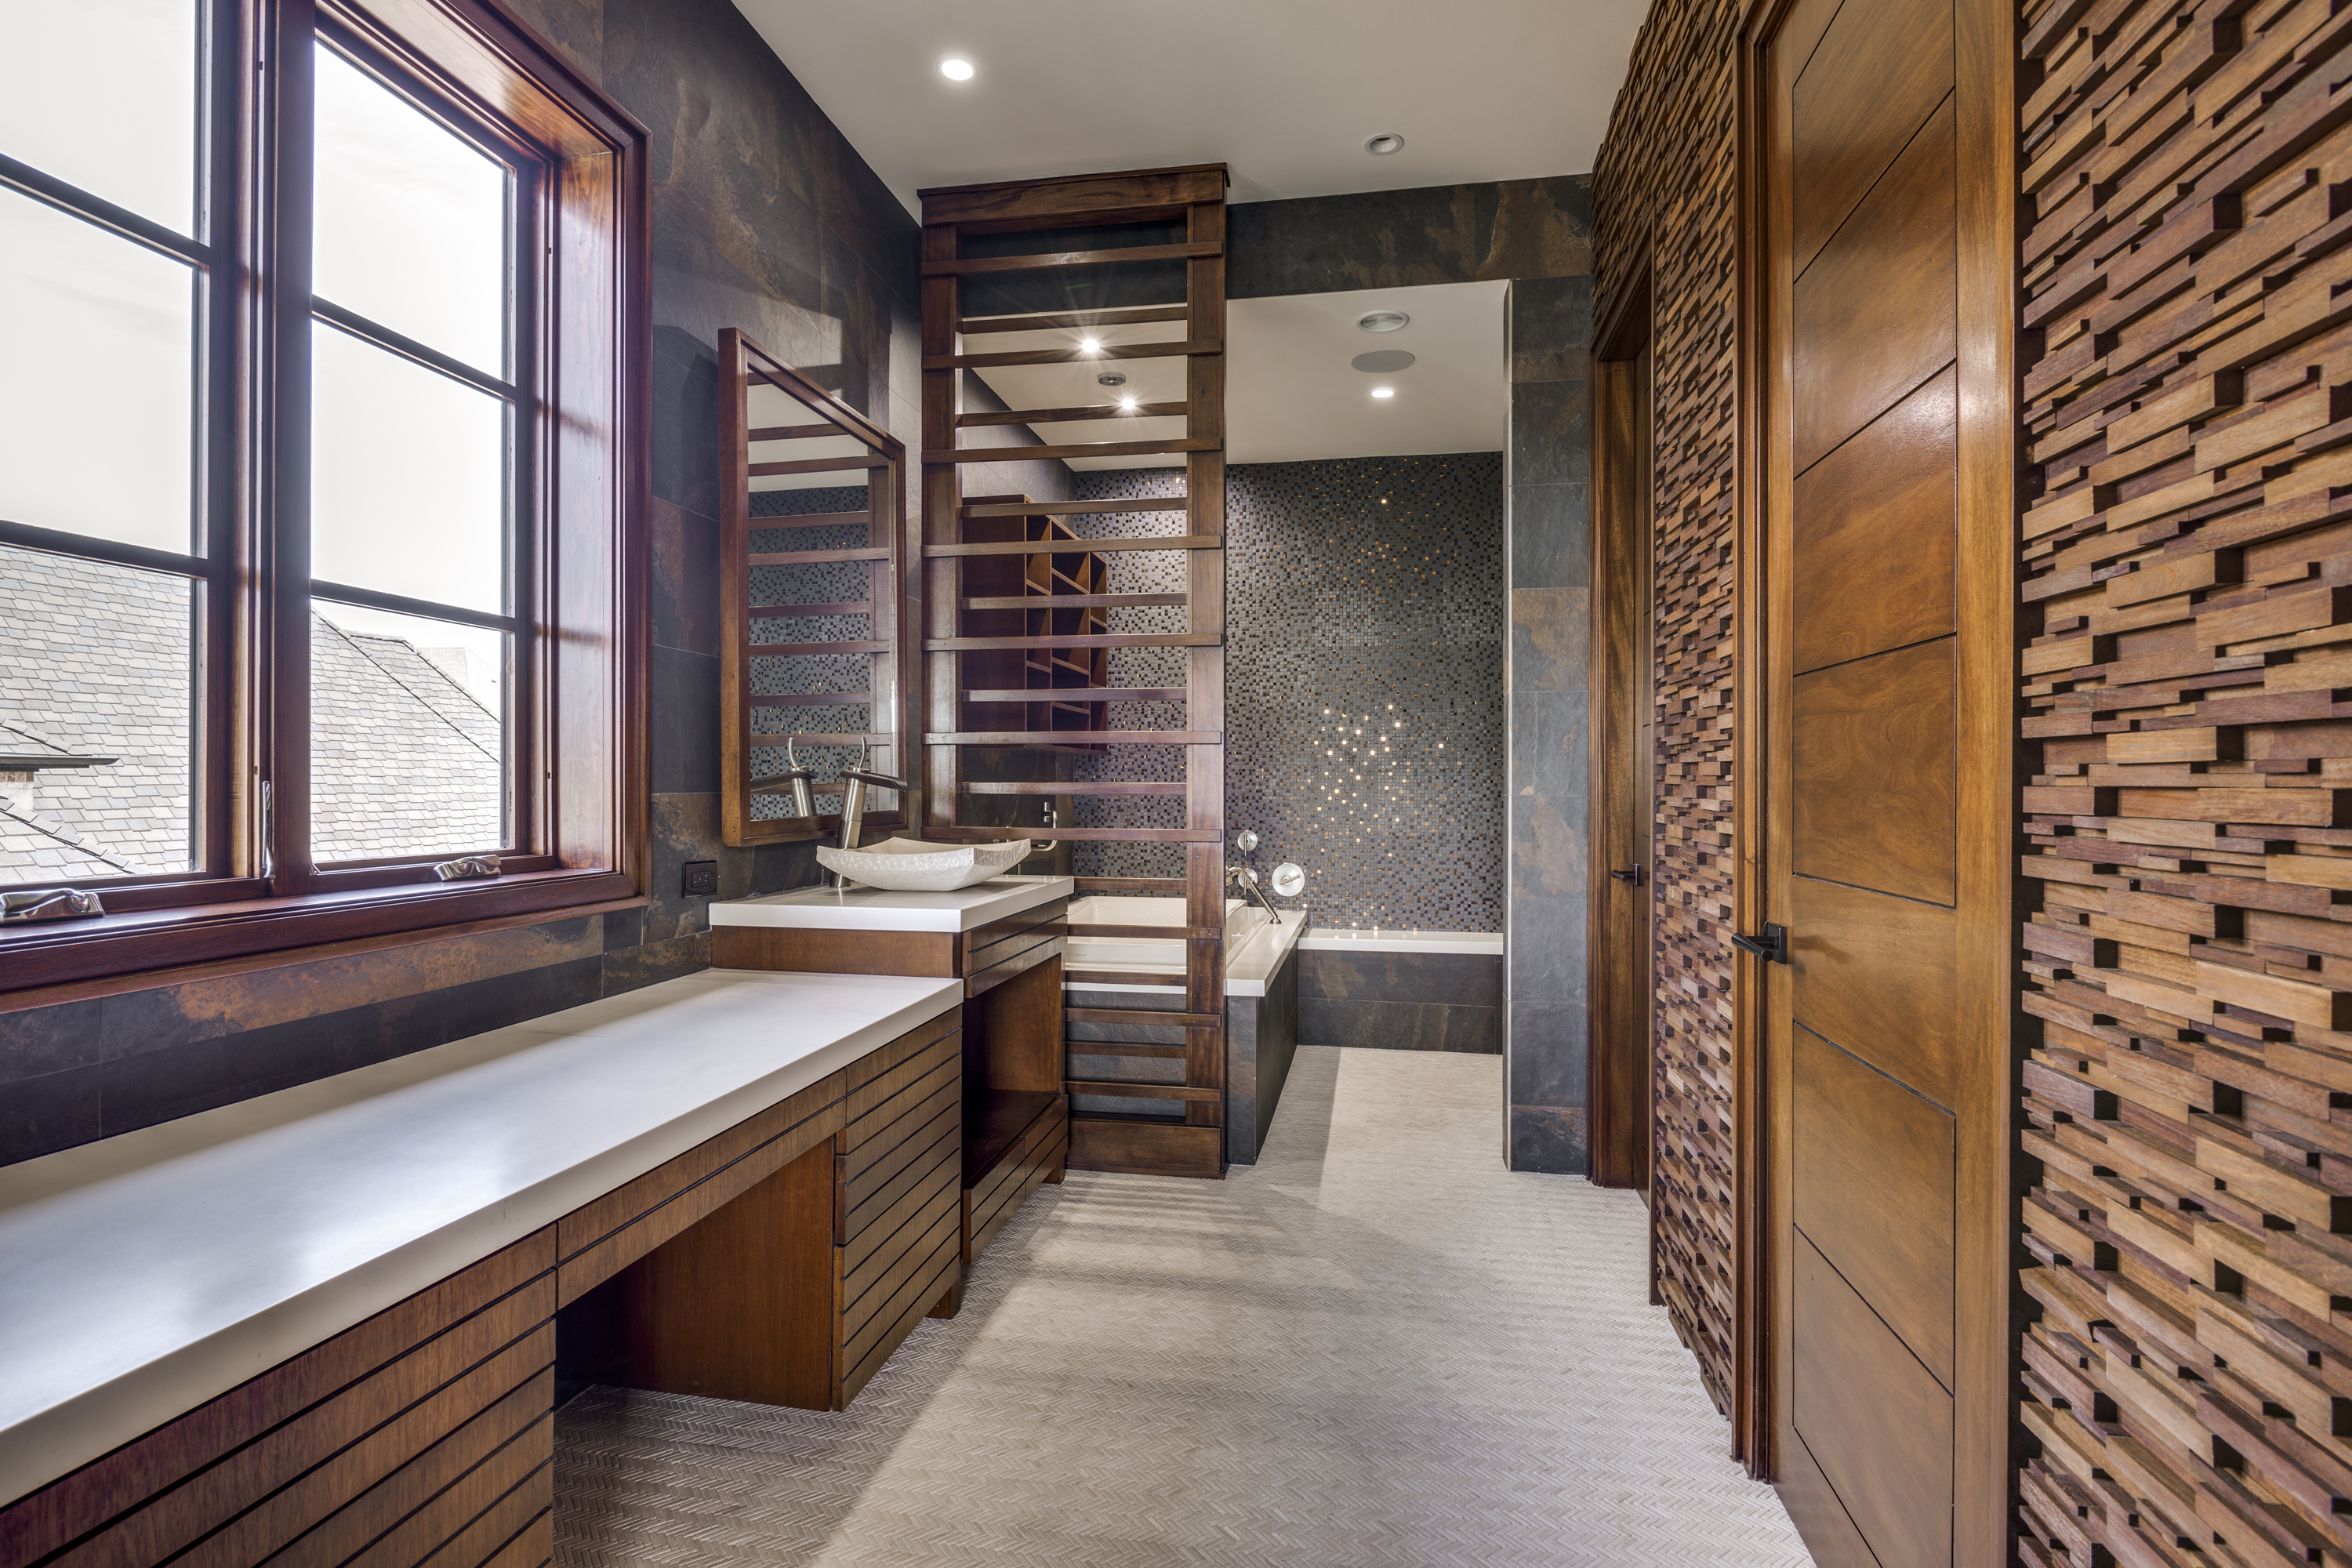 A beautiful bathroom with wooden finish